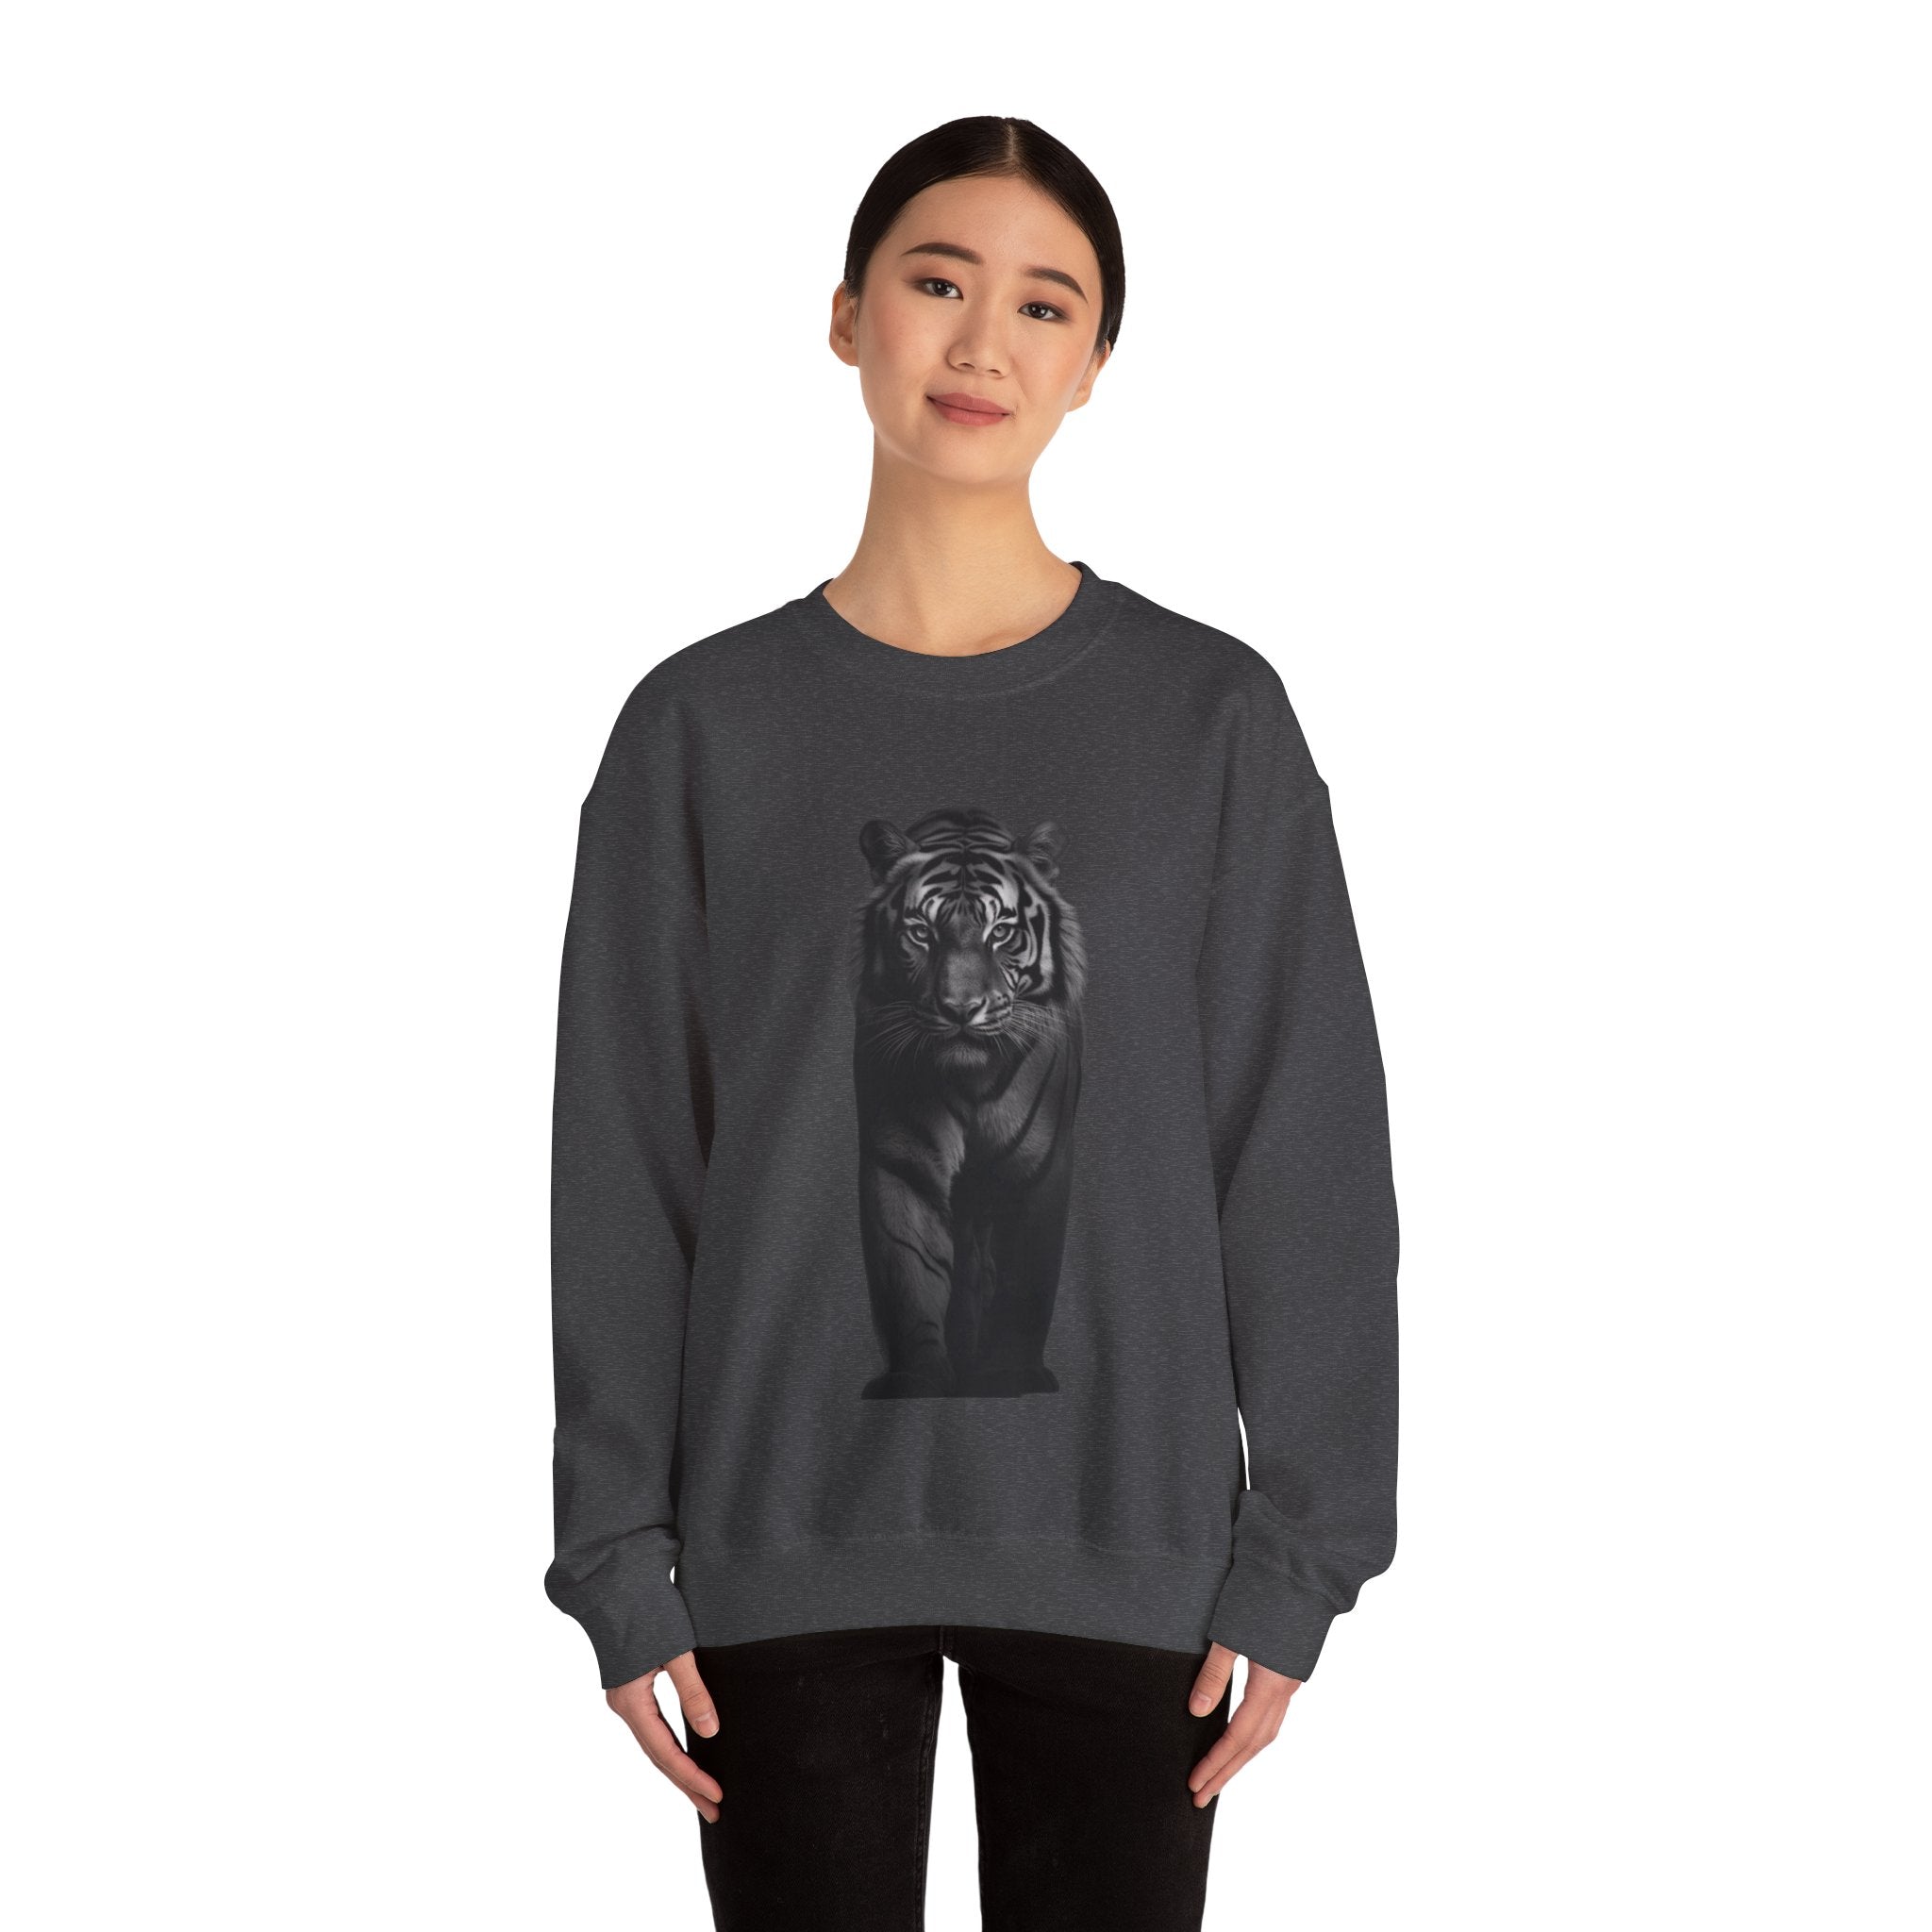 The image features a unisex Heavy Blend™ crewneck sweatshirt adorned with a vibrant, high-definition design of a tiger's intense stare. The sweatshirt is shown in a rich, appealing color, highlighting the detailed artwork and the cozy, relaxed fit of the garment, designed to inspire and comfort its wearer.